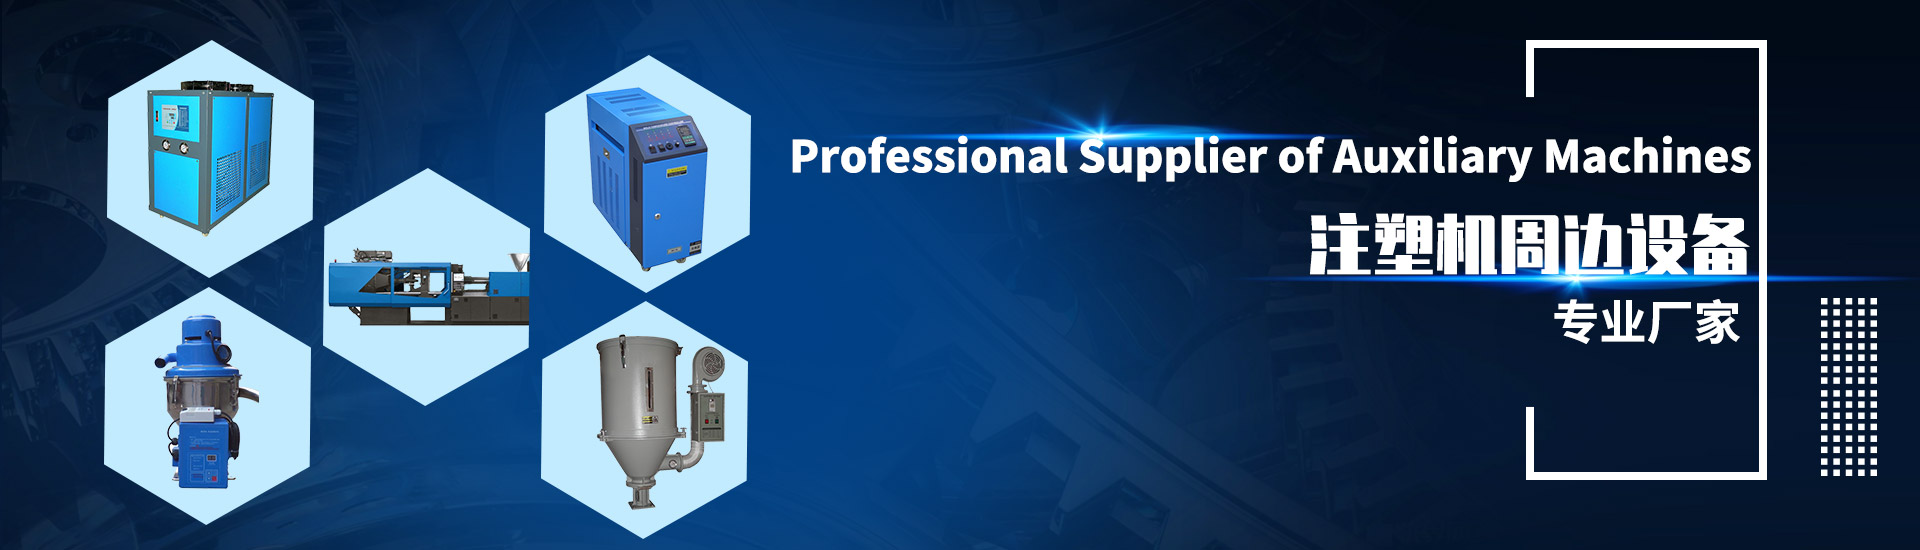 Professional Supplier of Plastic Auxiliary Machines